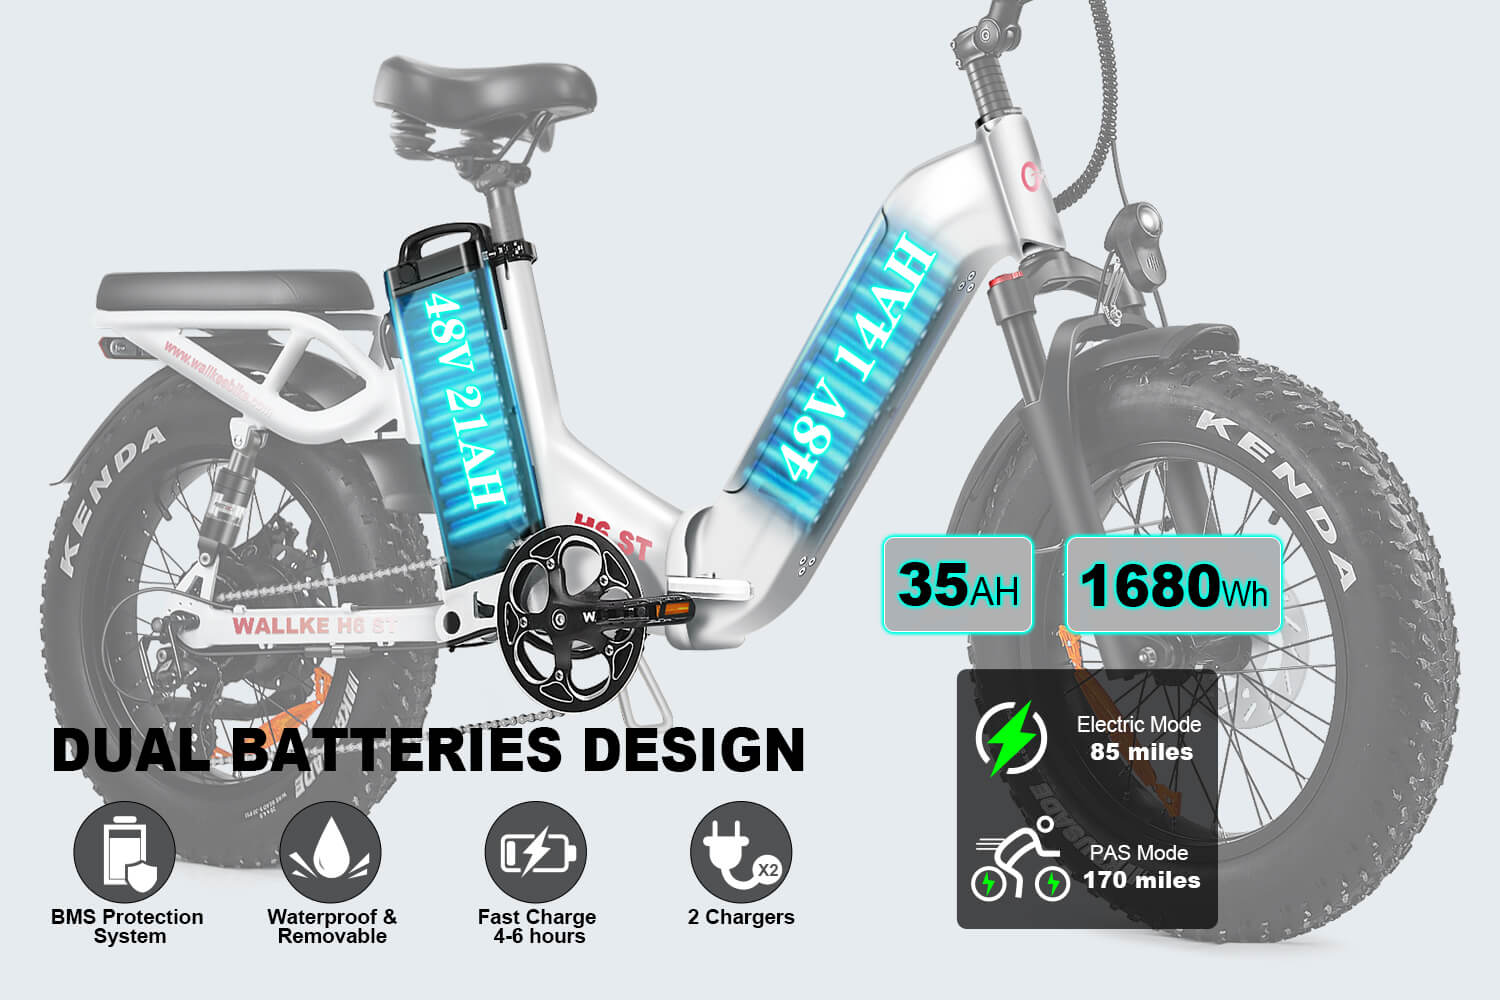 Wallke E-bike H6ST is equipped with 750W motor (peak value 1400W), enough power to make your ride more enjoyable and longer